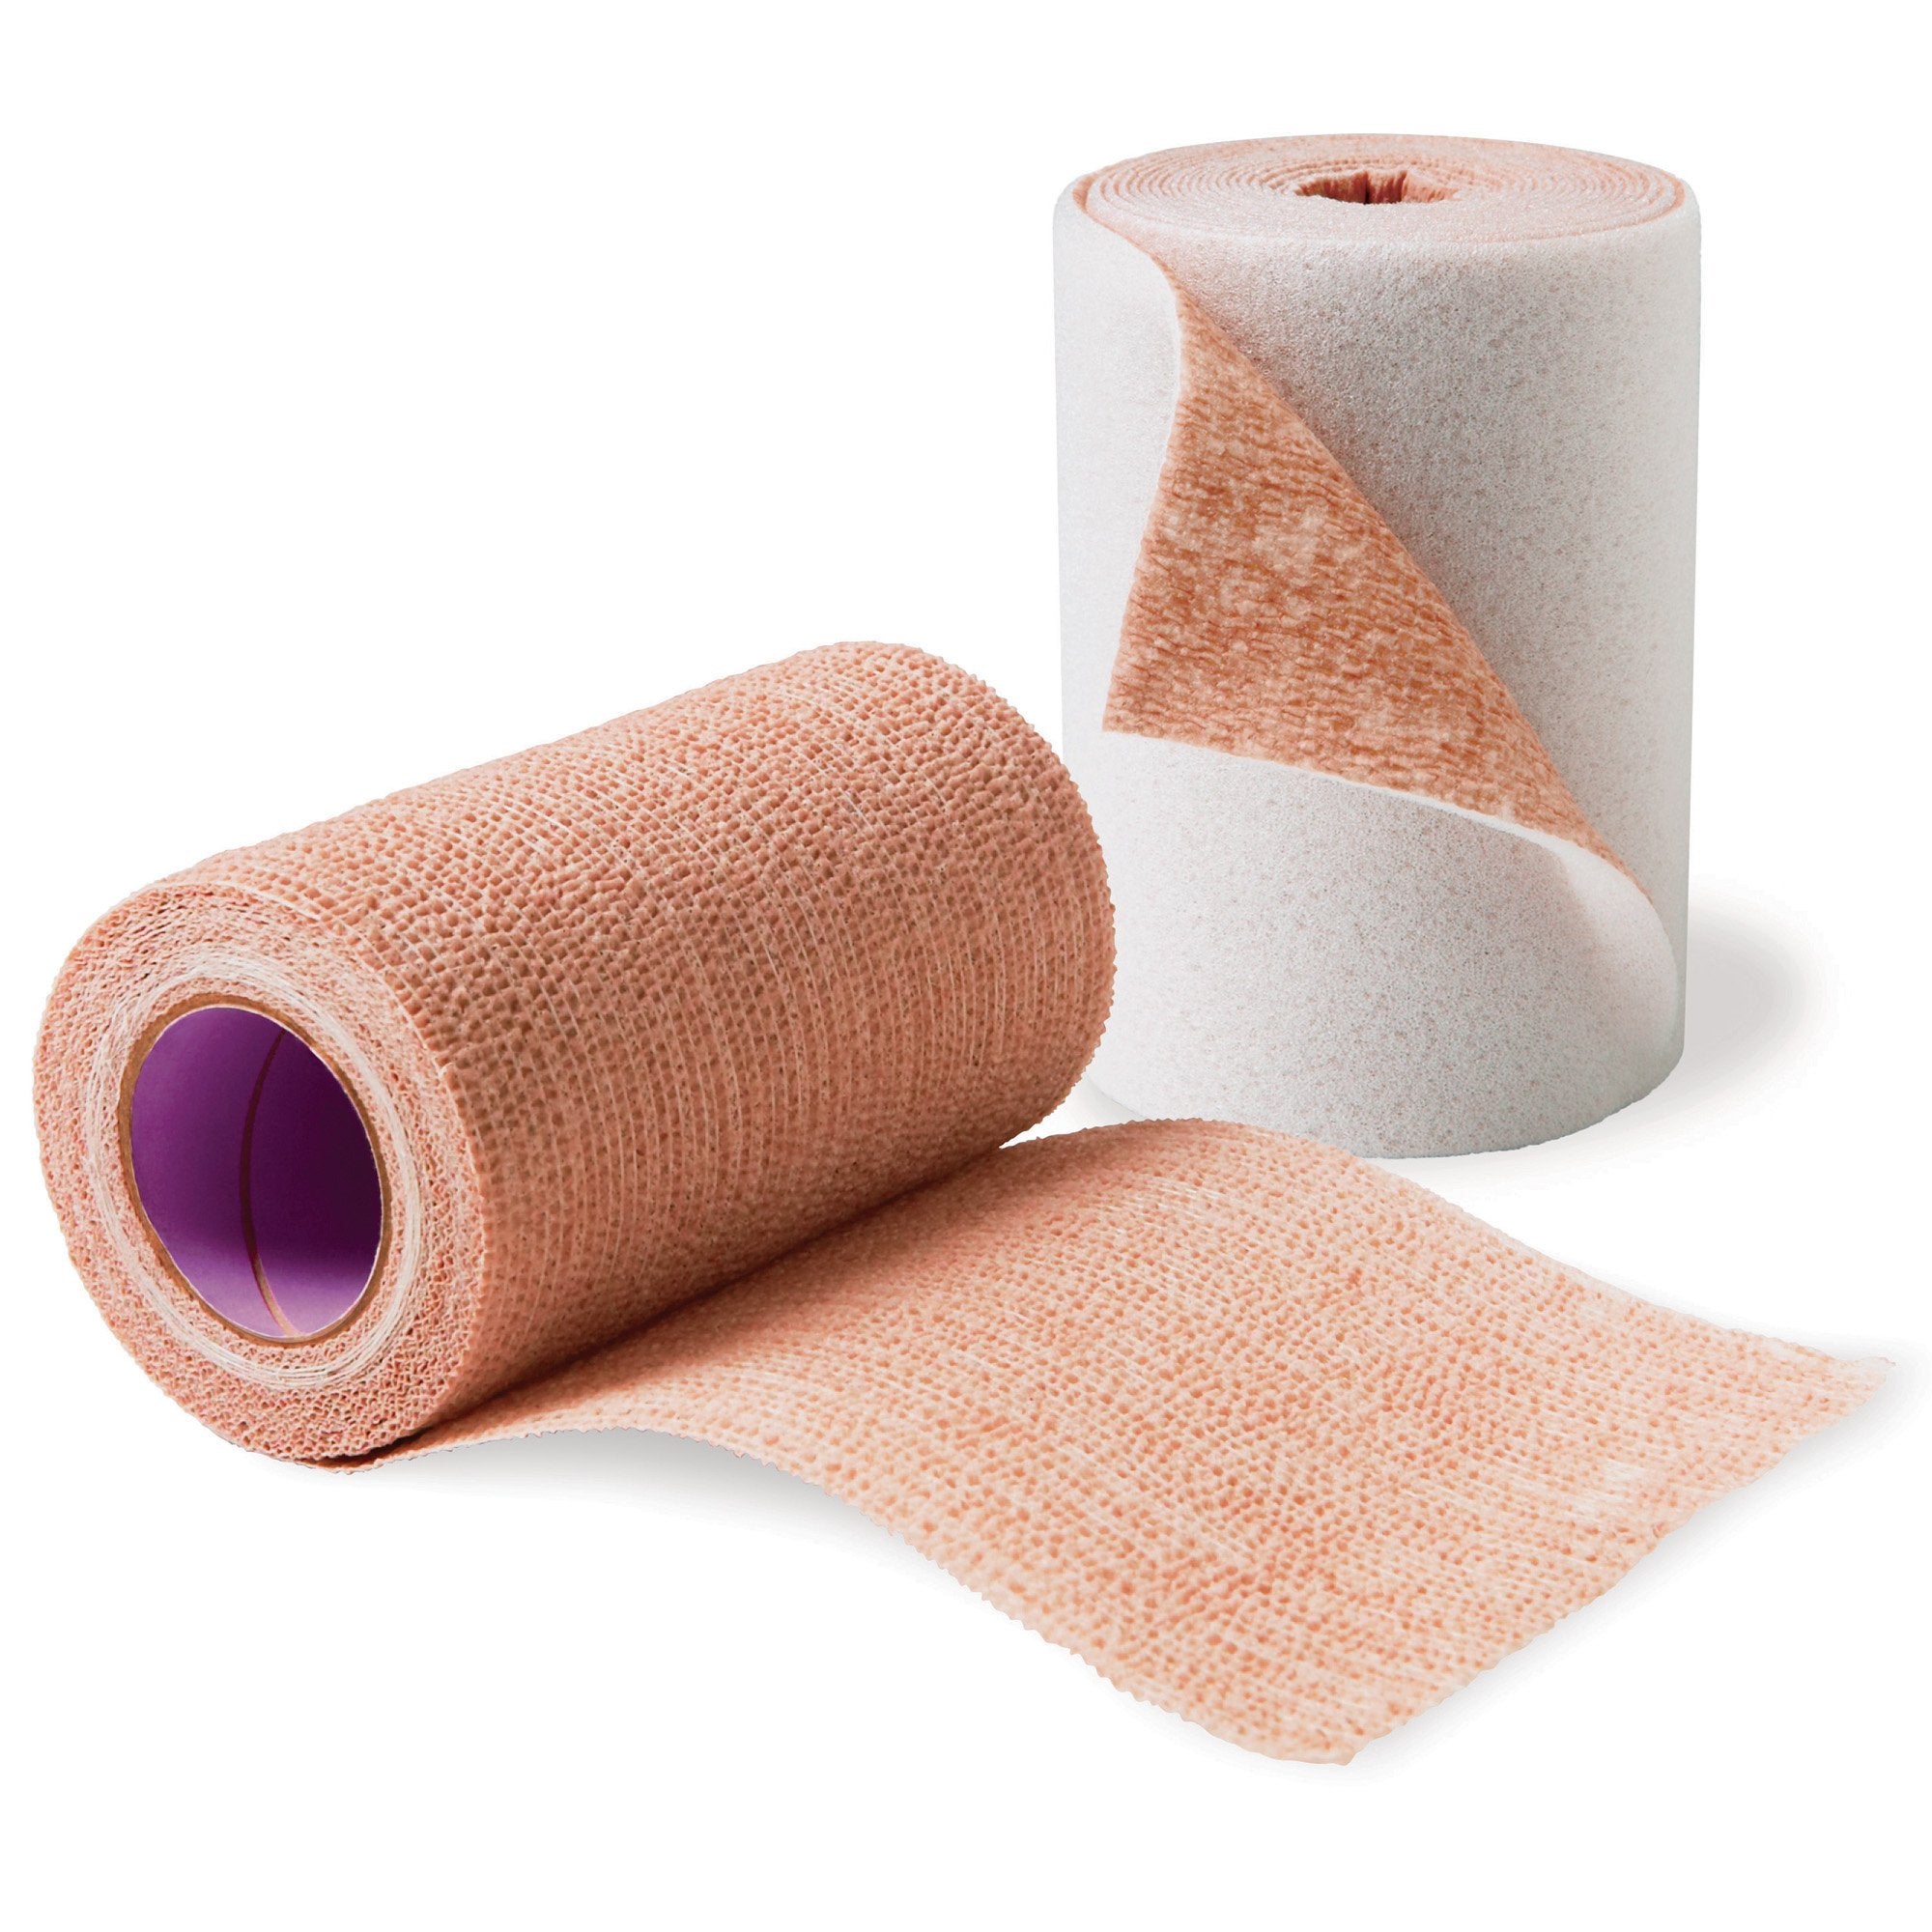 2 Layer Compression Bandage System 3M™ Coban™ 2 2-9/10 Yard X 4 Inch / 4 Inch X 5-1/10 Yard Self-Adherent / Pull On Closure Tan / White NonSterile 35 to 40 mmHg